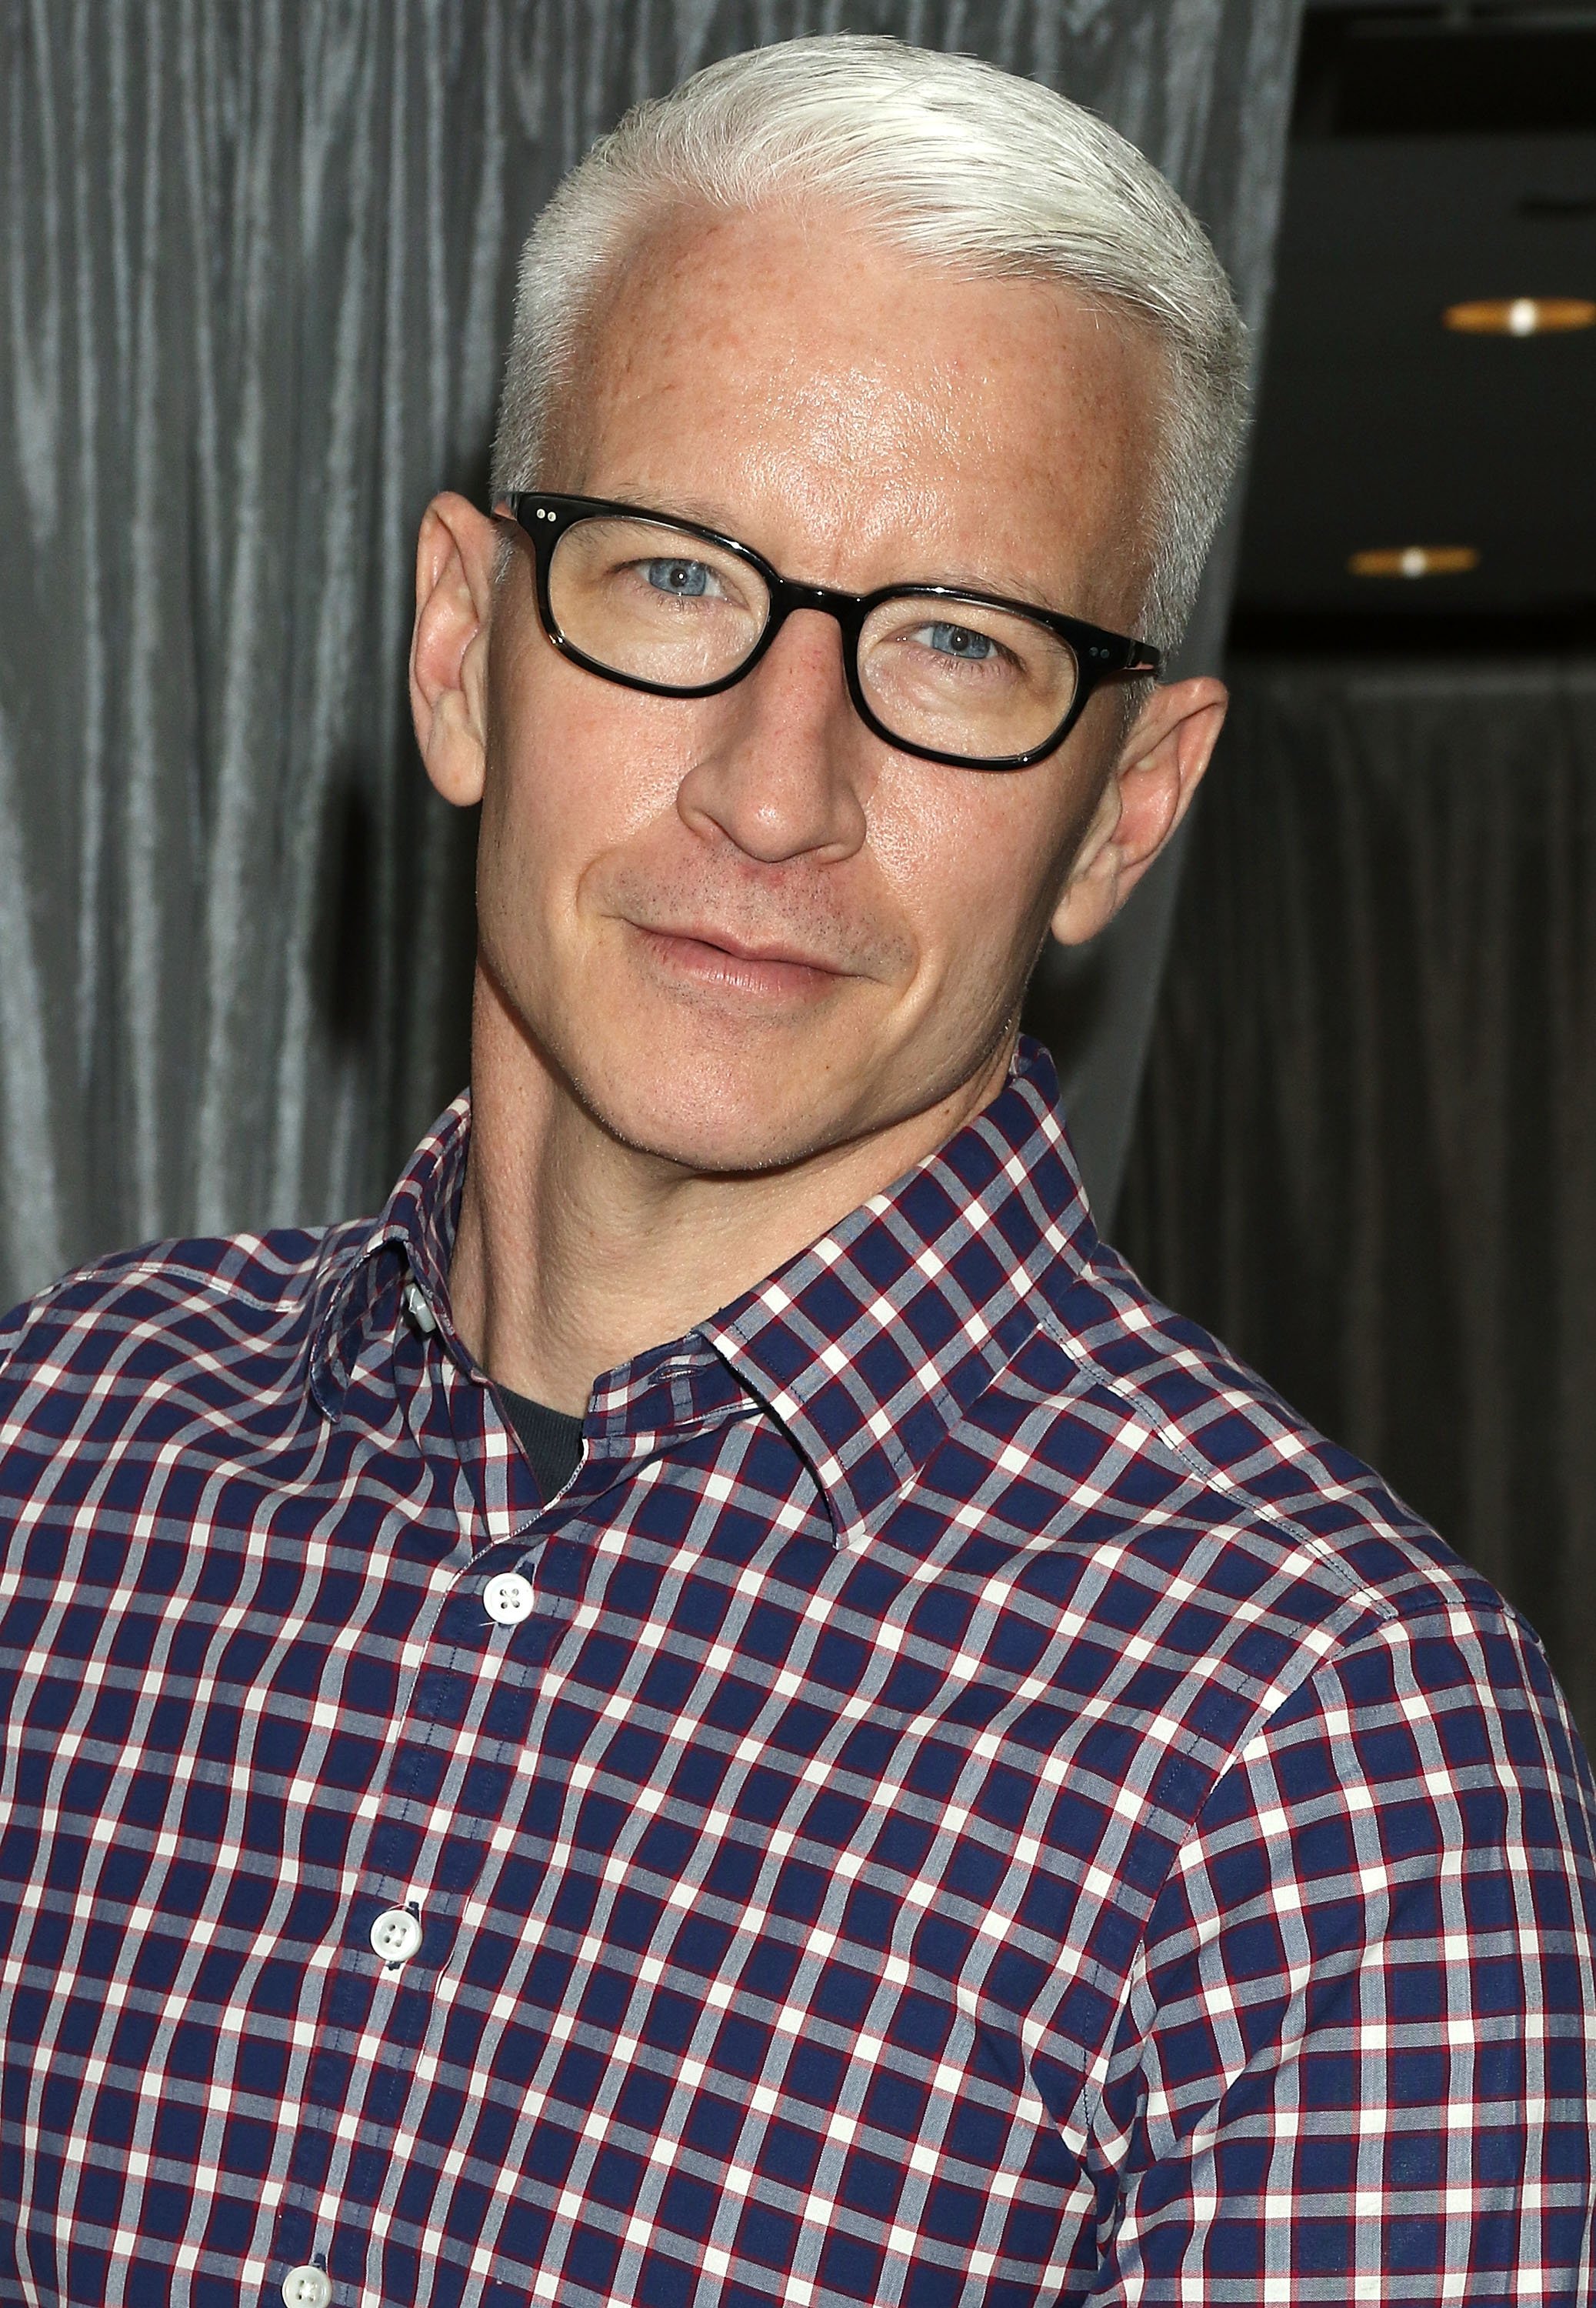 Anderson Cooper attends AOL Build Speaker Series to discuss "Nothing Left Unsaid" at AOL Studios In New York on April 15, 2016 in New York City. | Source: Getty Images